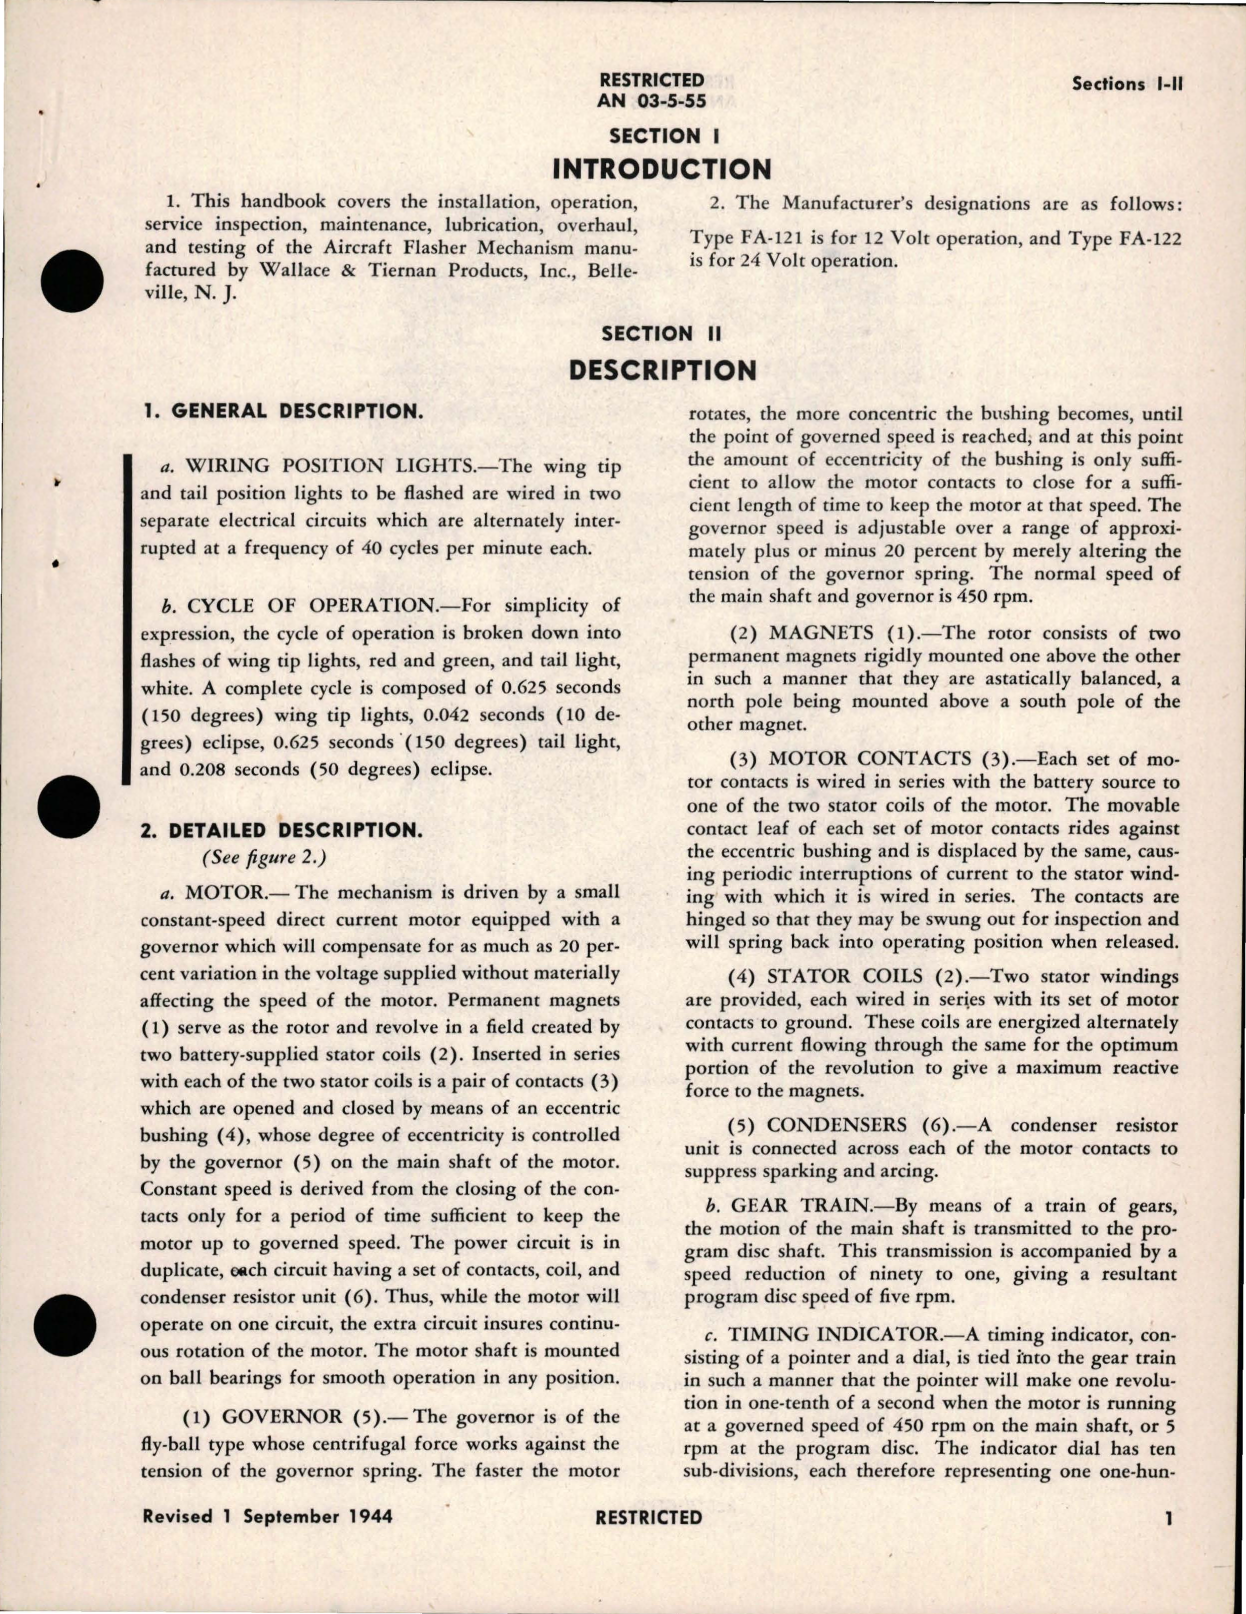 Sample page 5 from AirCorps Library document: Revision to Instructions with Parts Catalog for Aircraft Flasher Mechanism - Types FA-121 and FA-122 